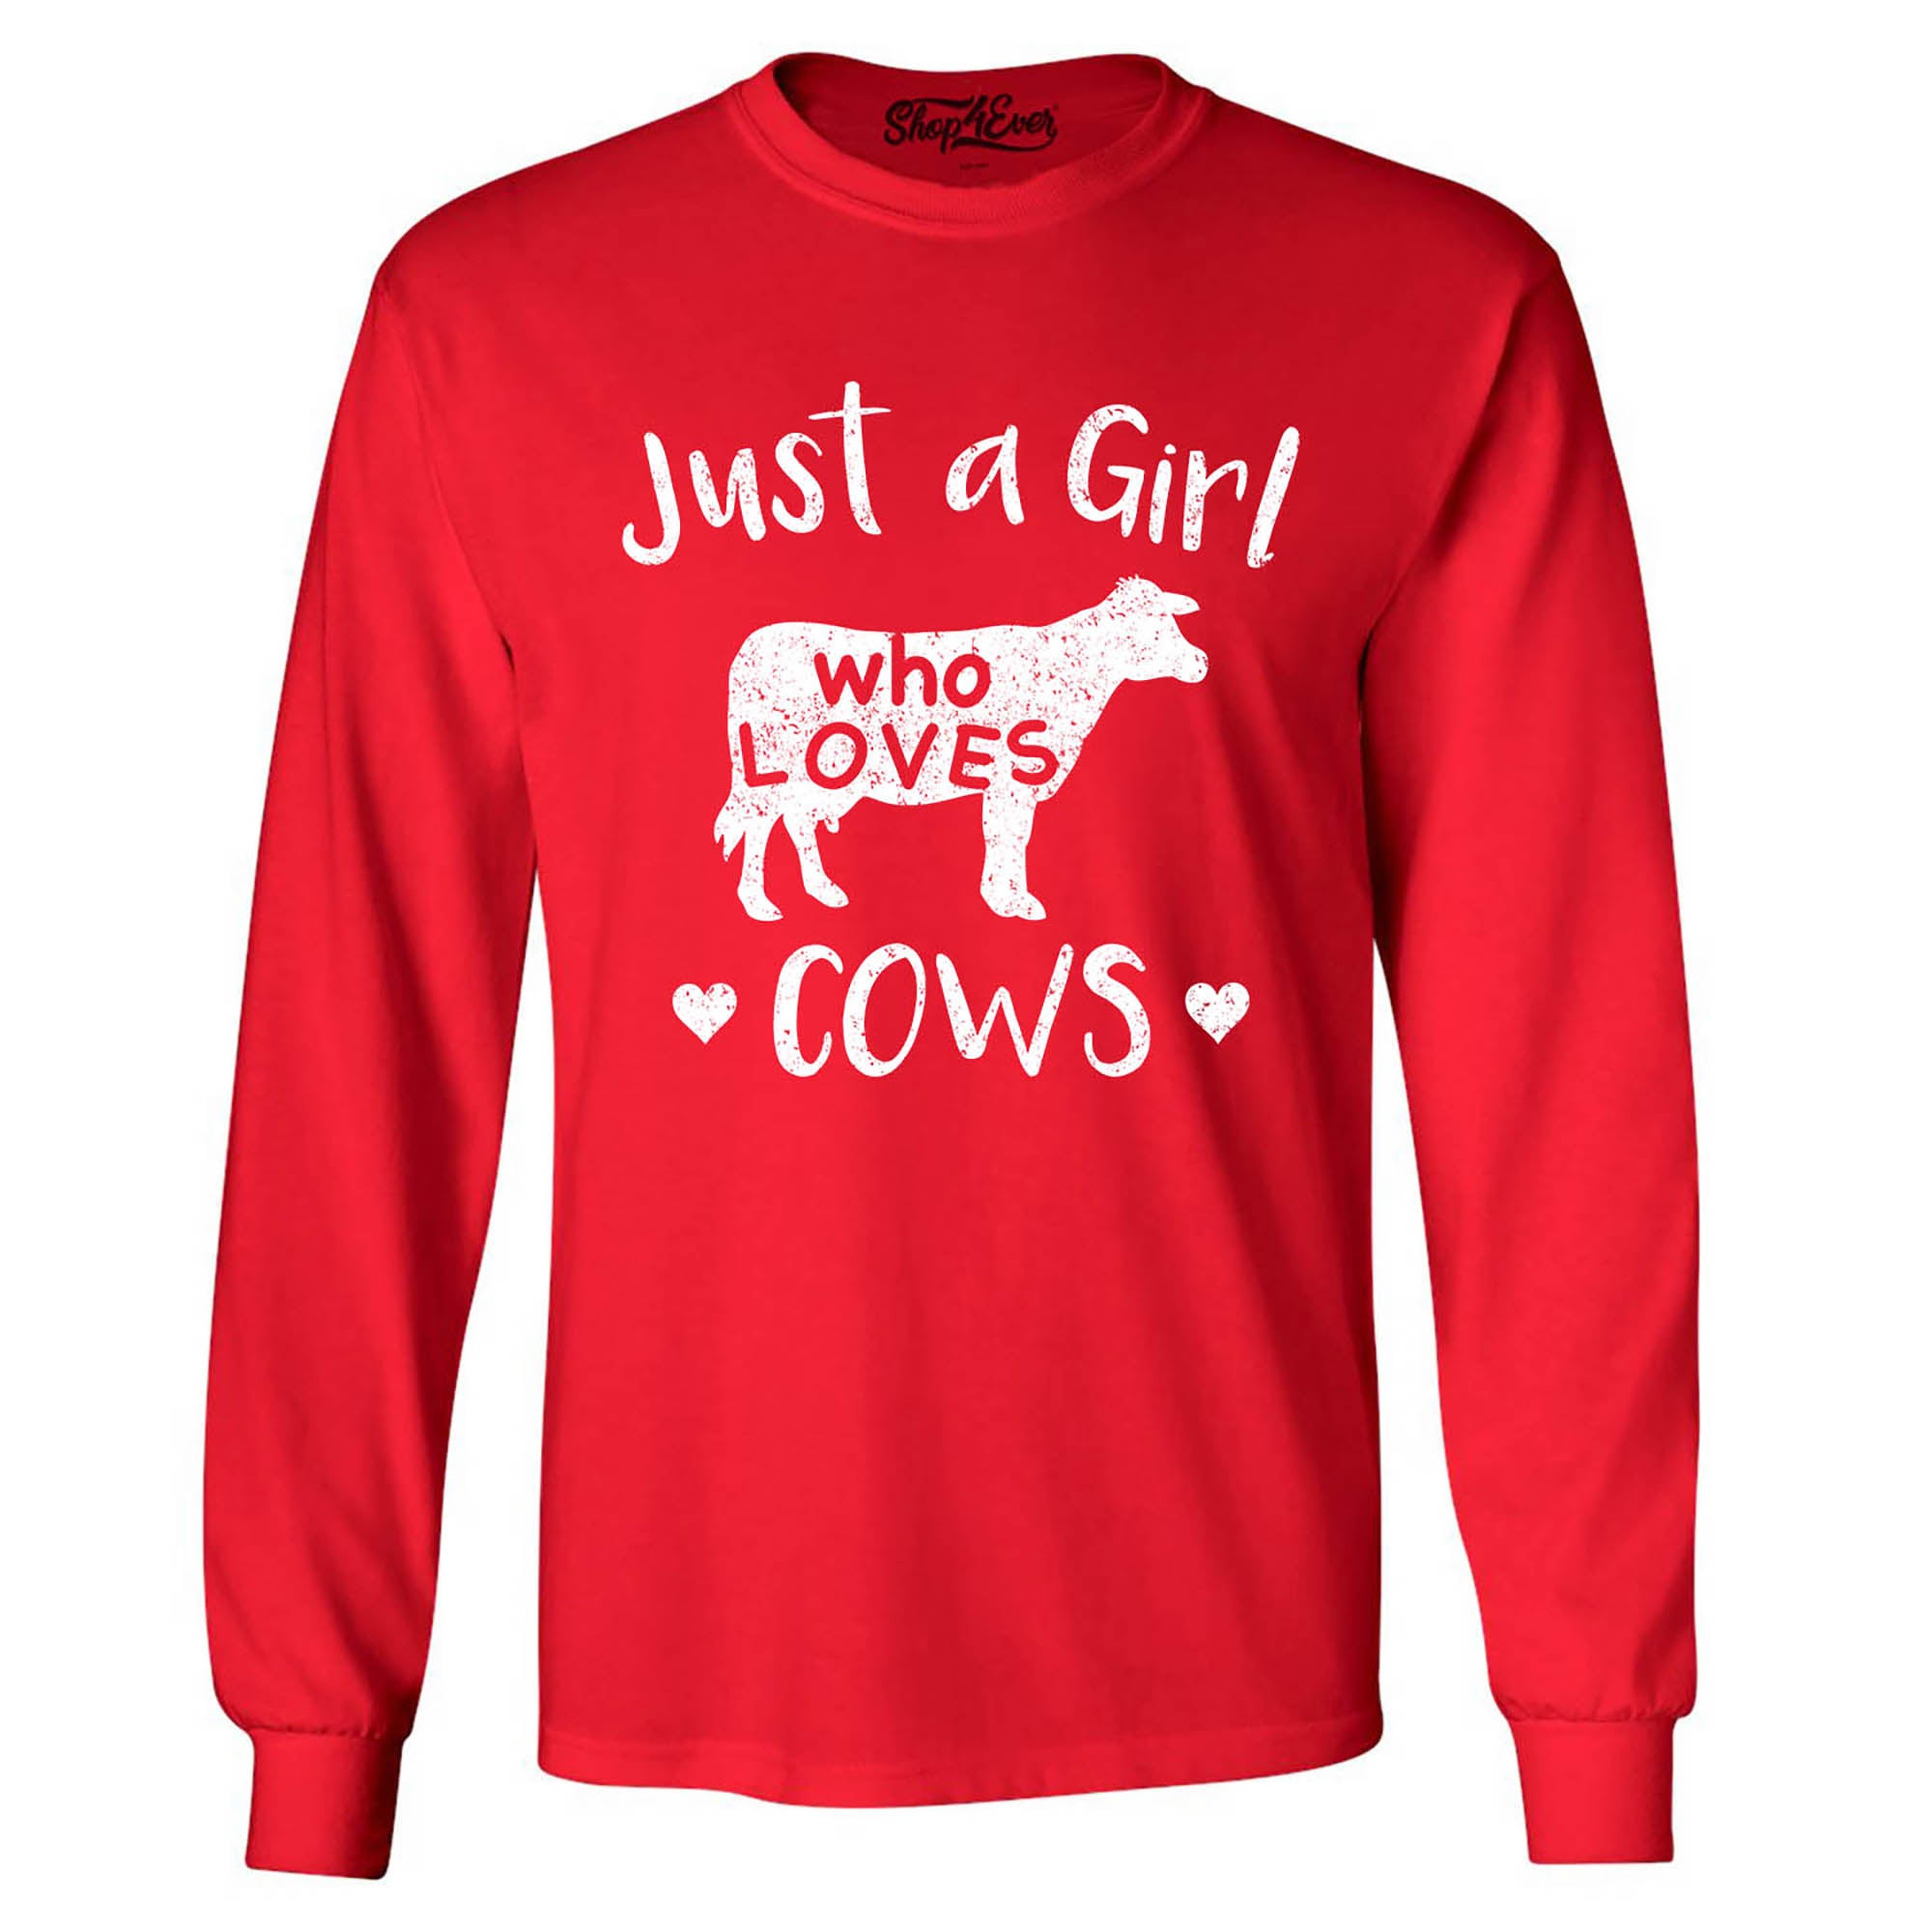 Just A Girl Who Loves Cows Long Sleeve Shirt